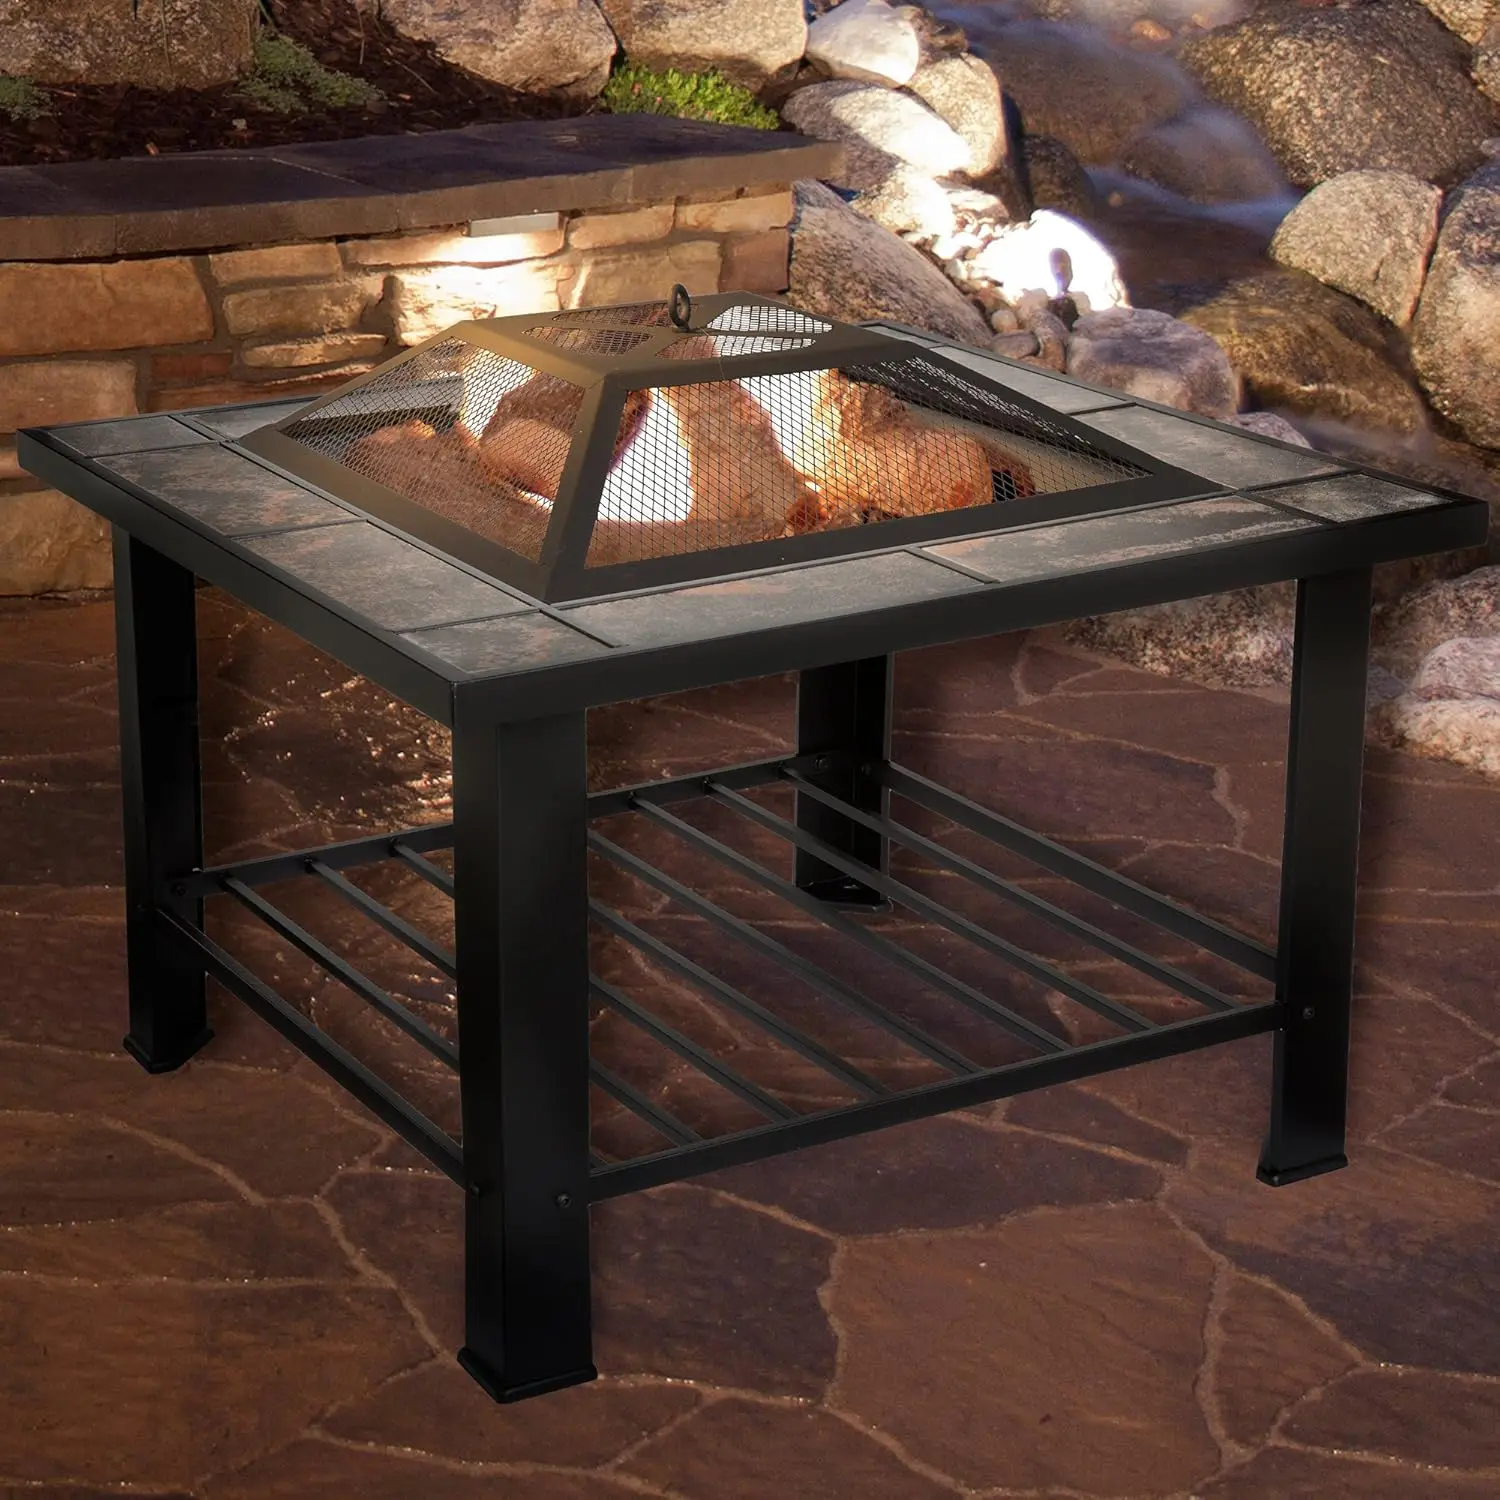 

50-104 Table – 30-Inch Square Wood Burning Bonfire Pit with Marble Edge, Spark Screen, Tile Fire Bowl Cover, Log Poker (Black)